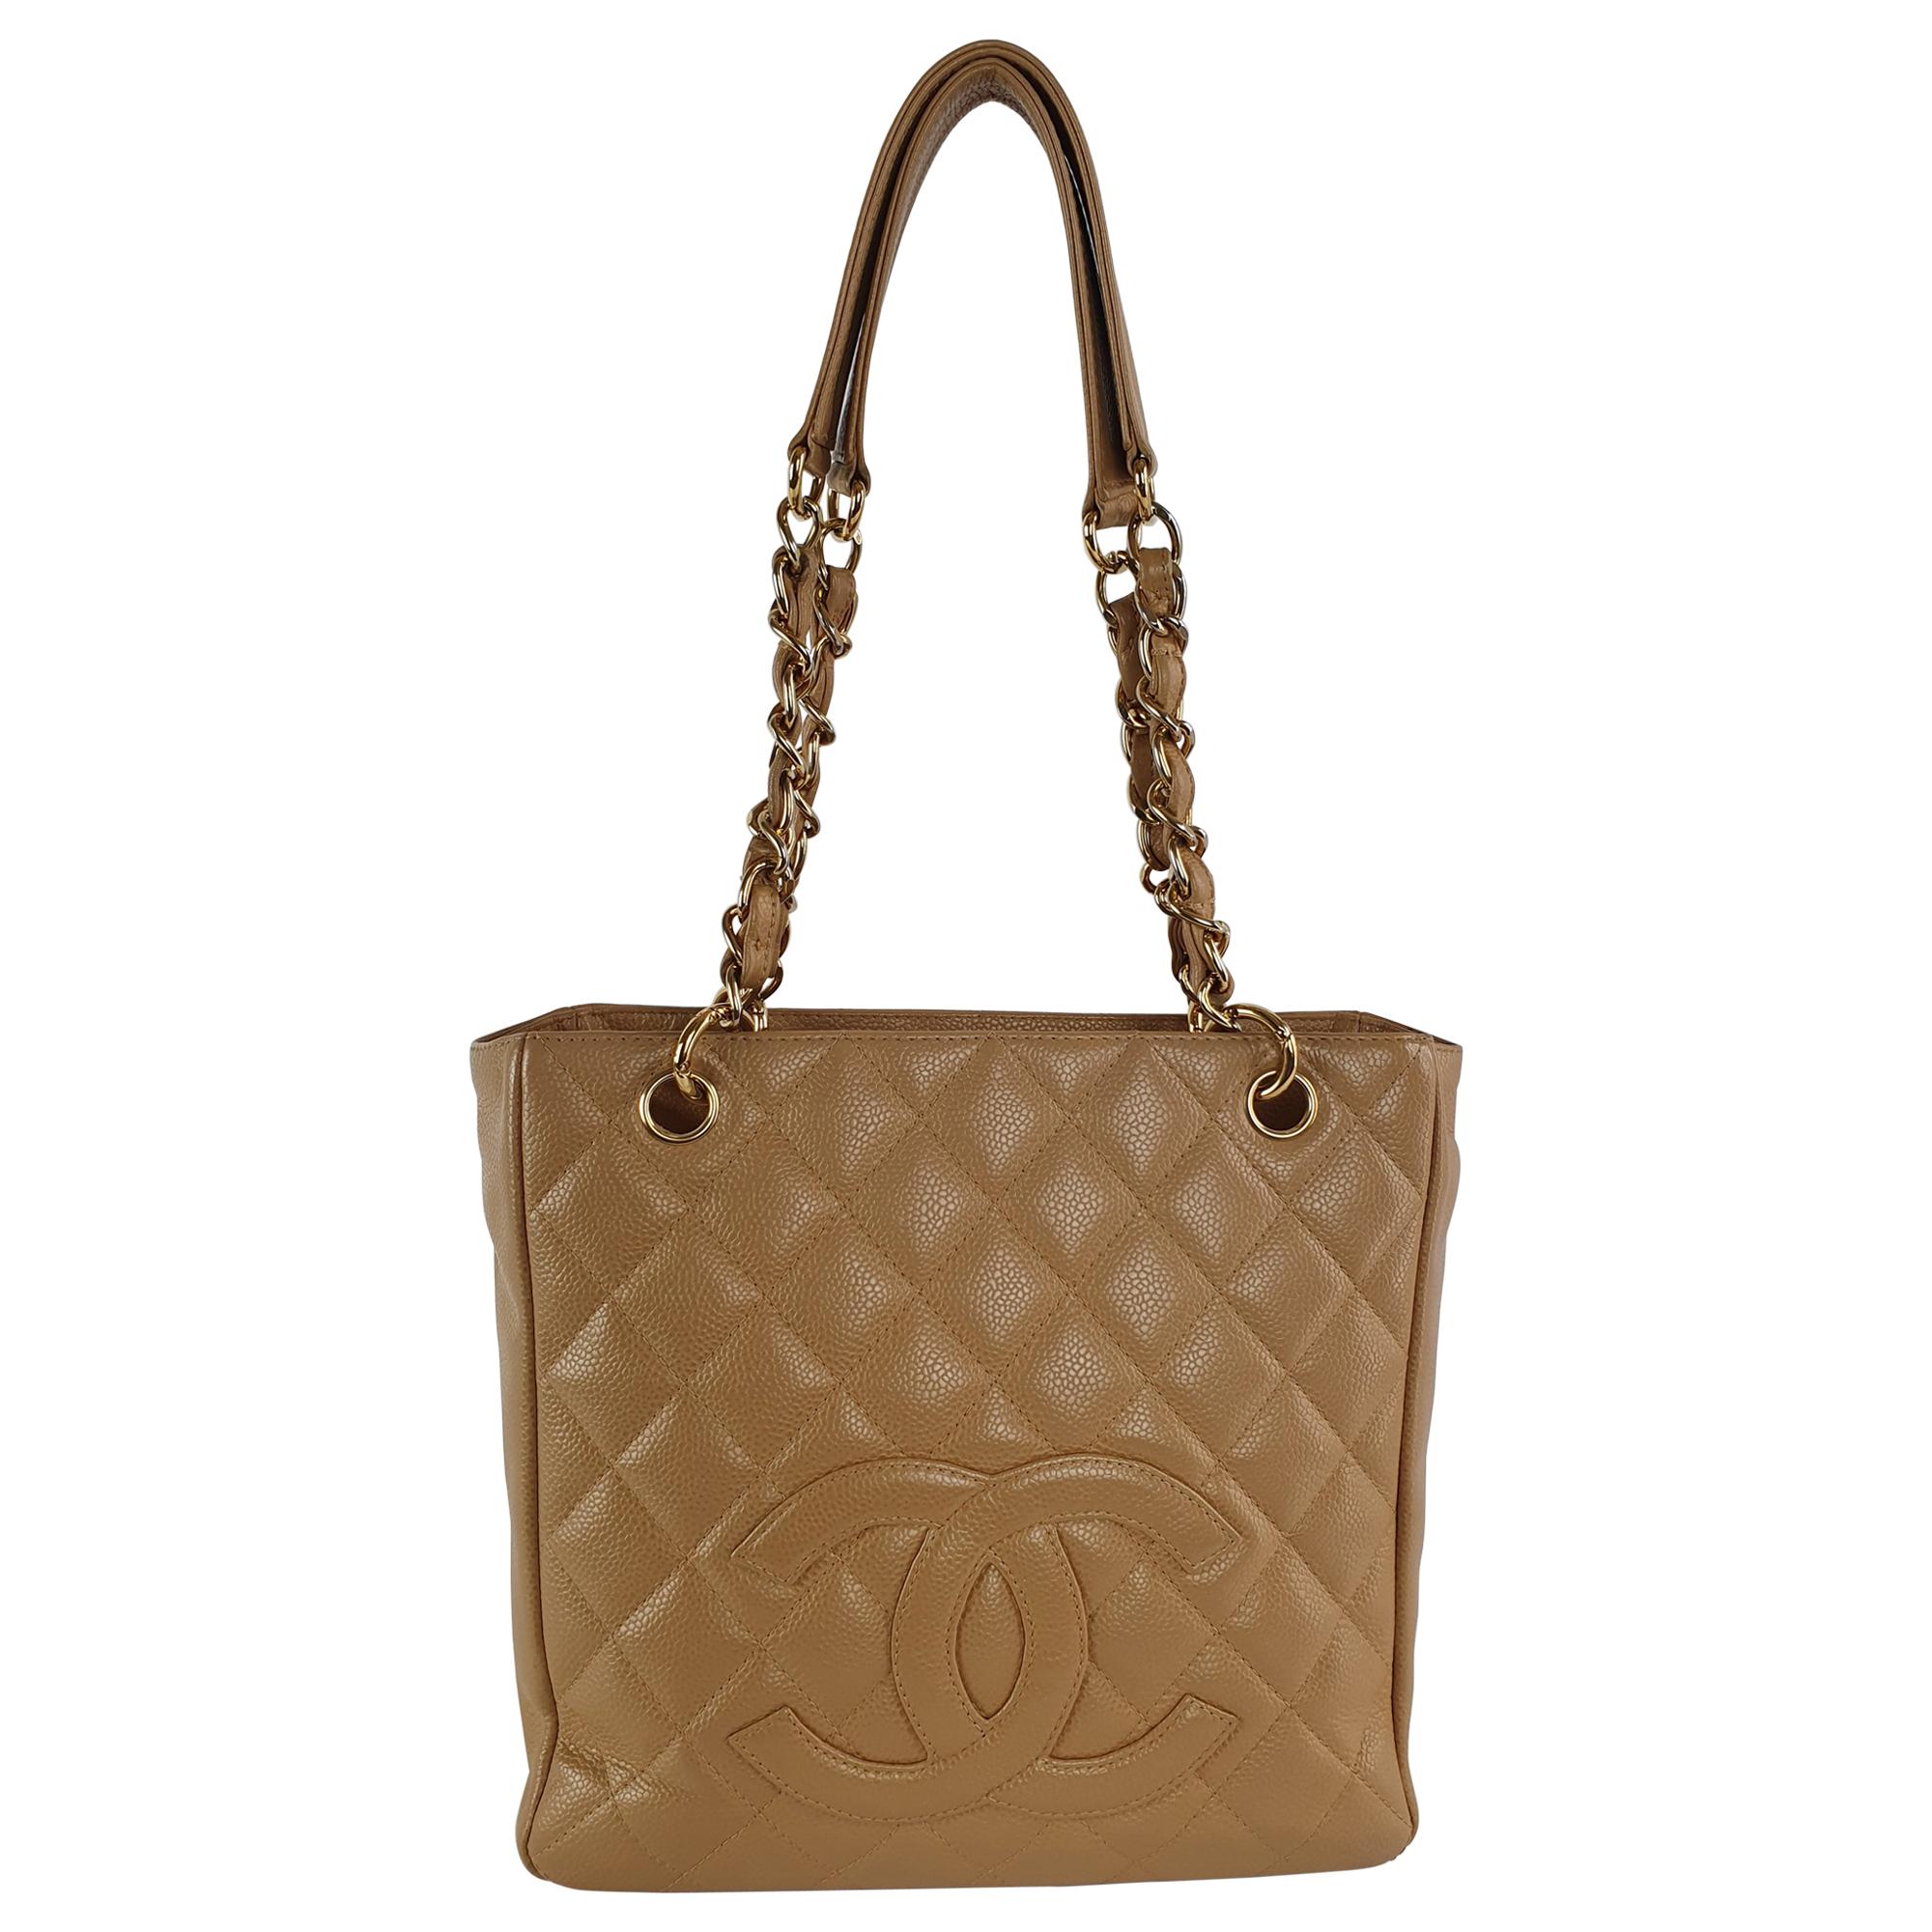 Chanel, Shopping bag in brown leather For Sale